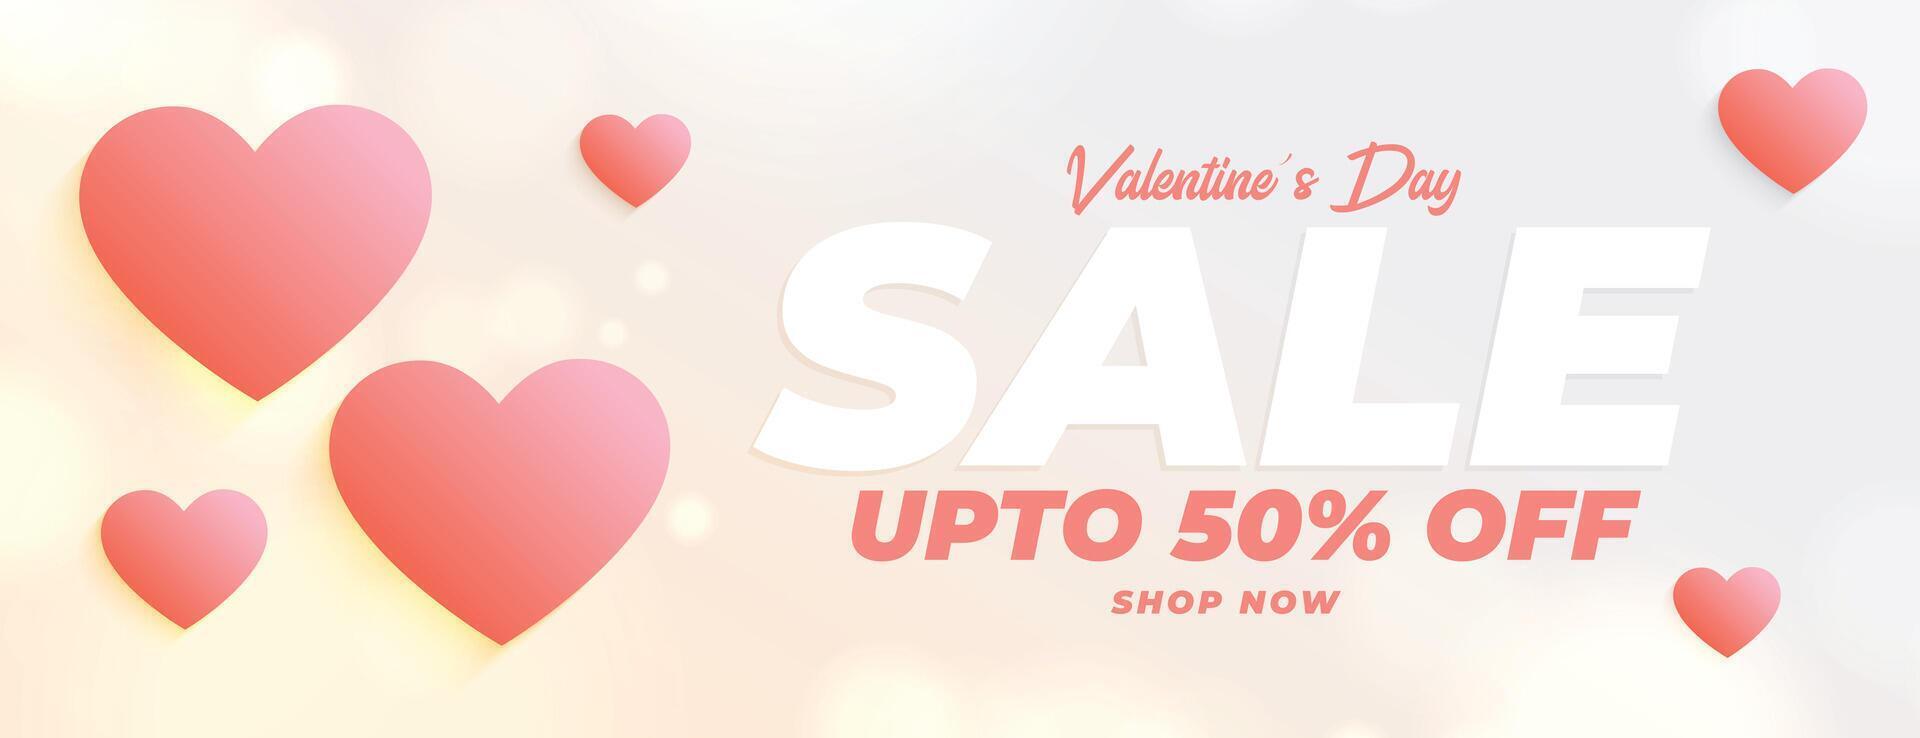 valentines day sale and discount banner design vector